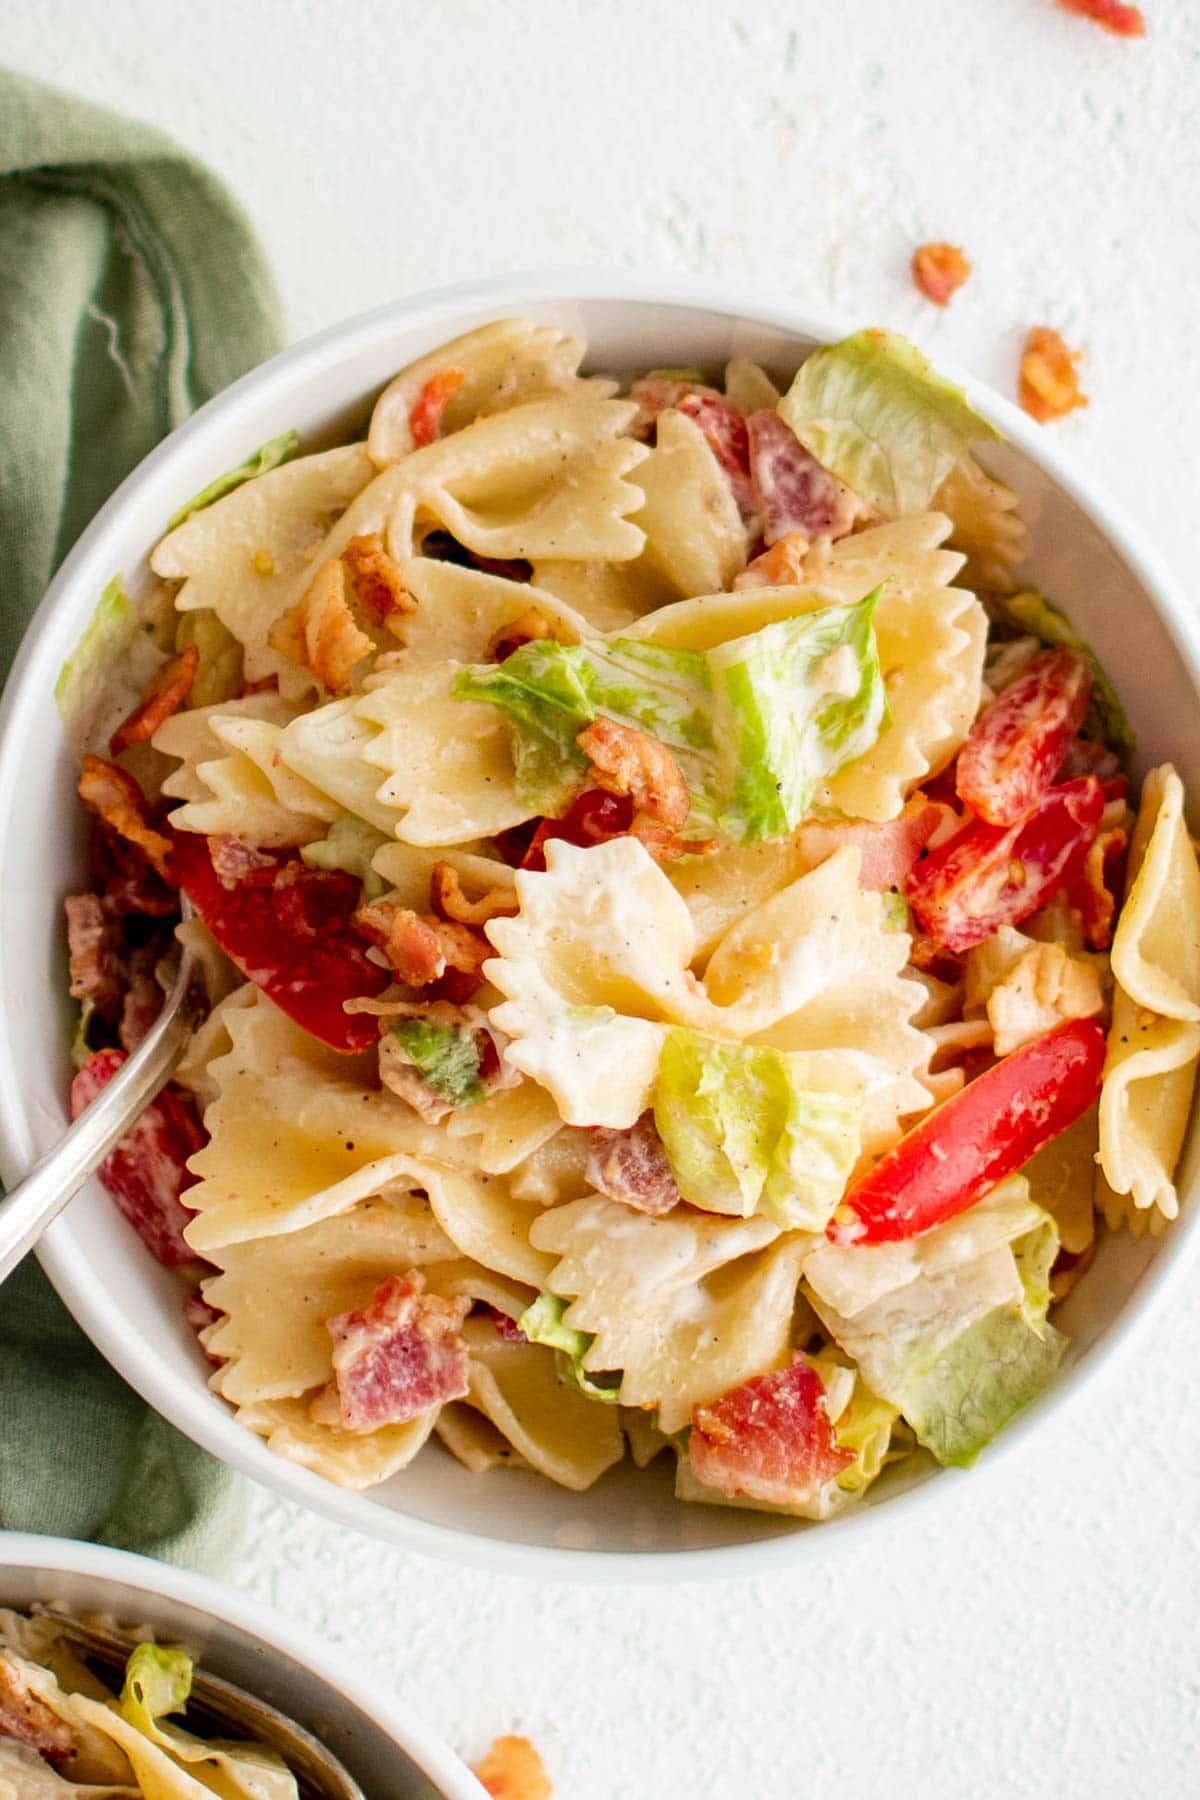 Bowl of pasta with bacon, tomatoes and lettuce.